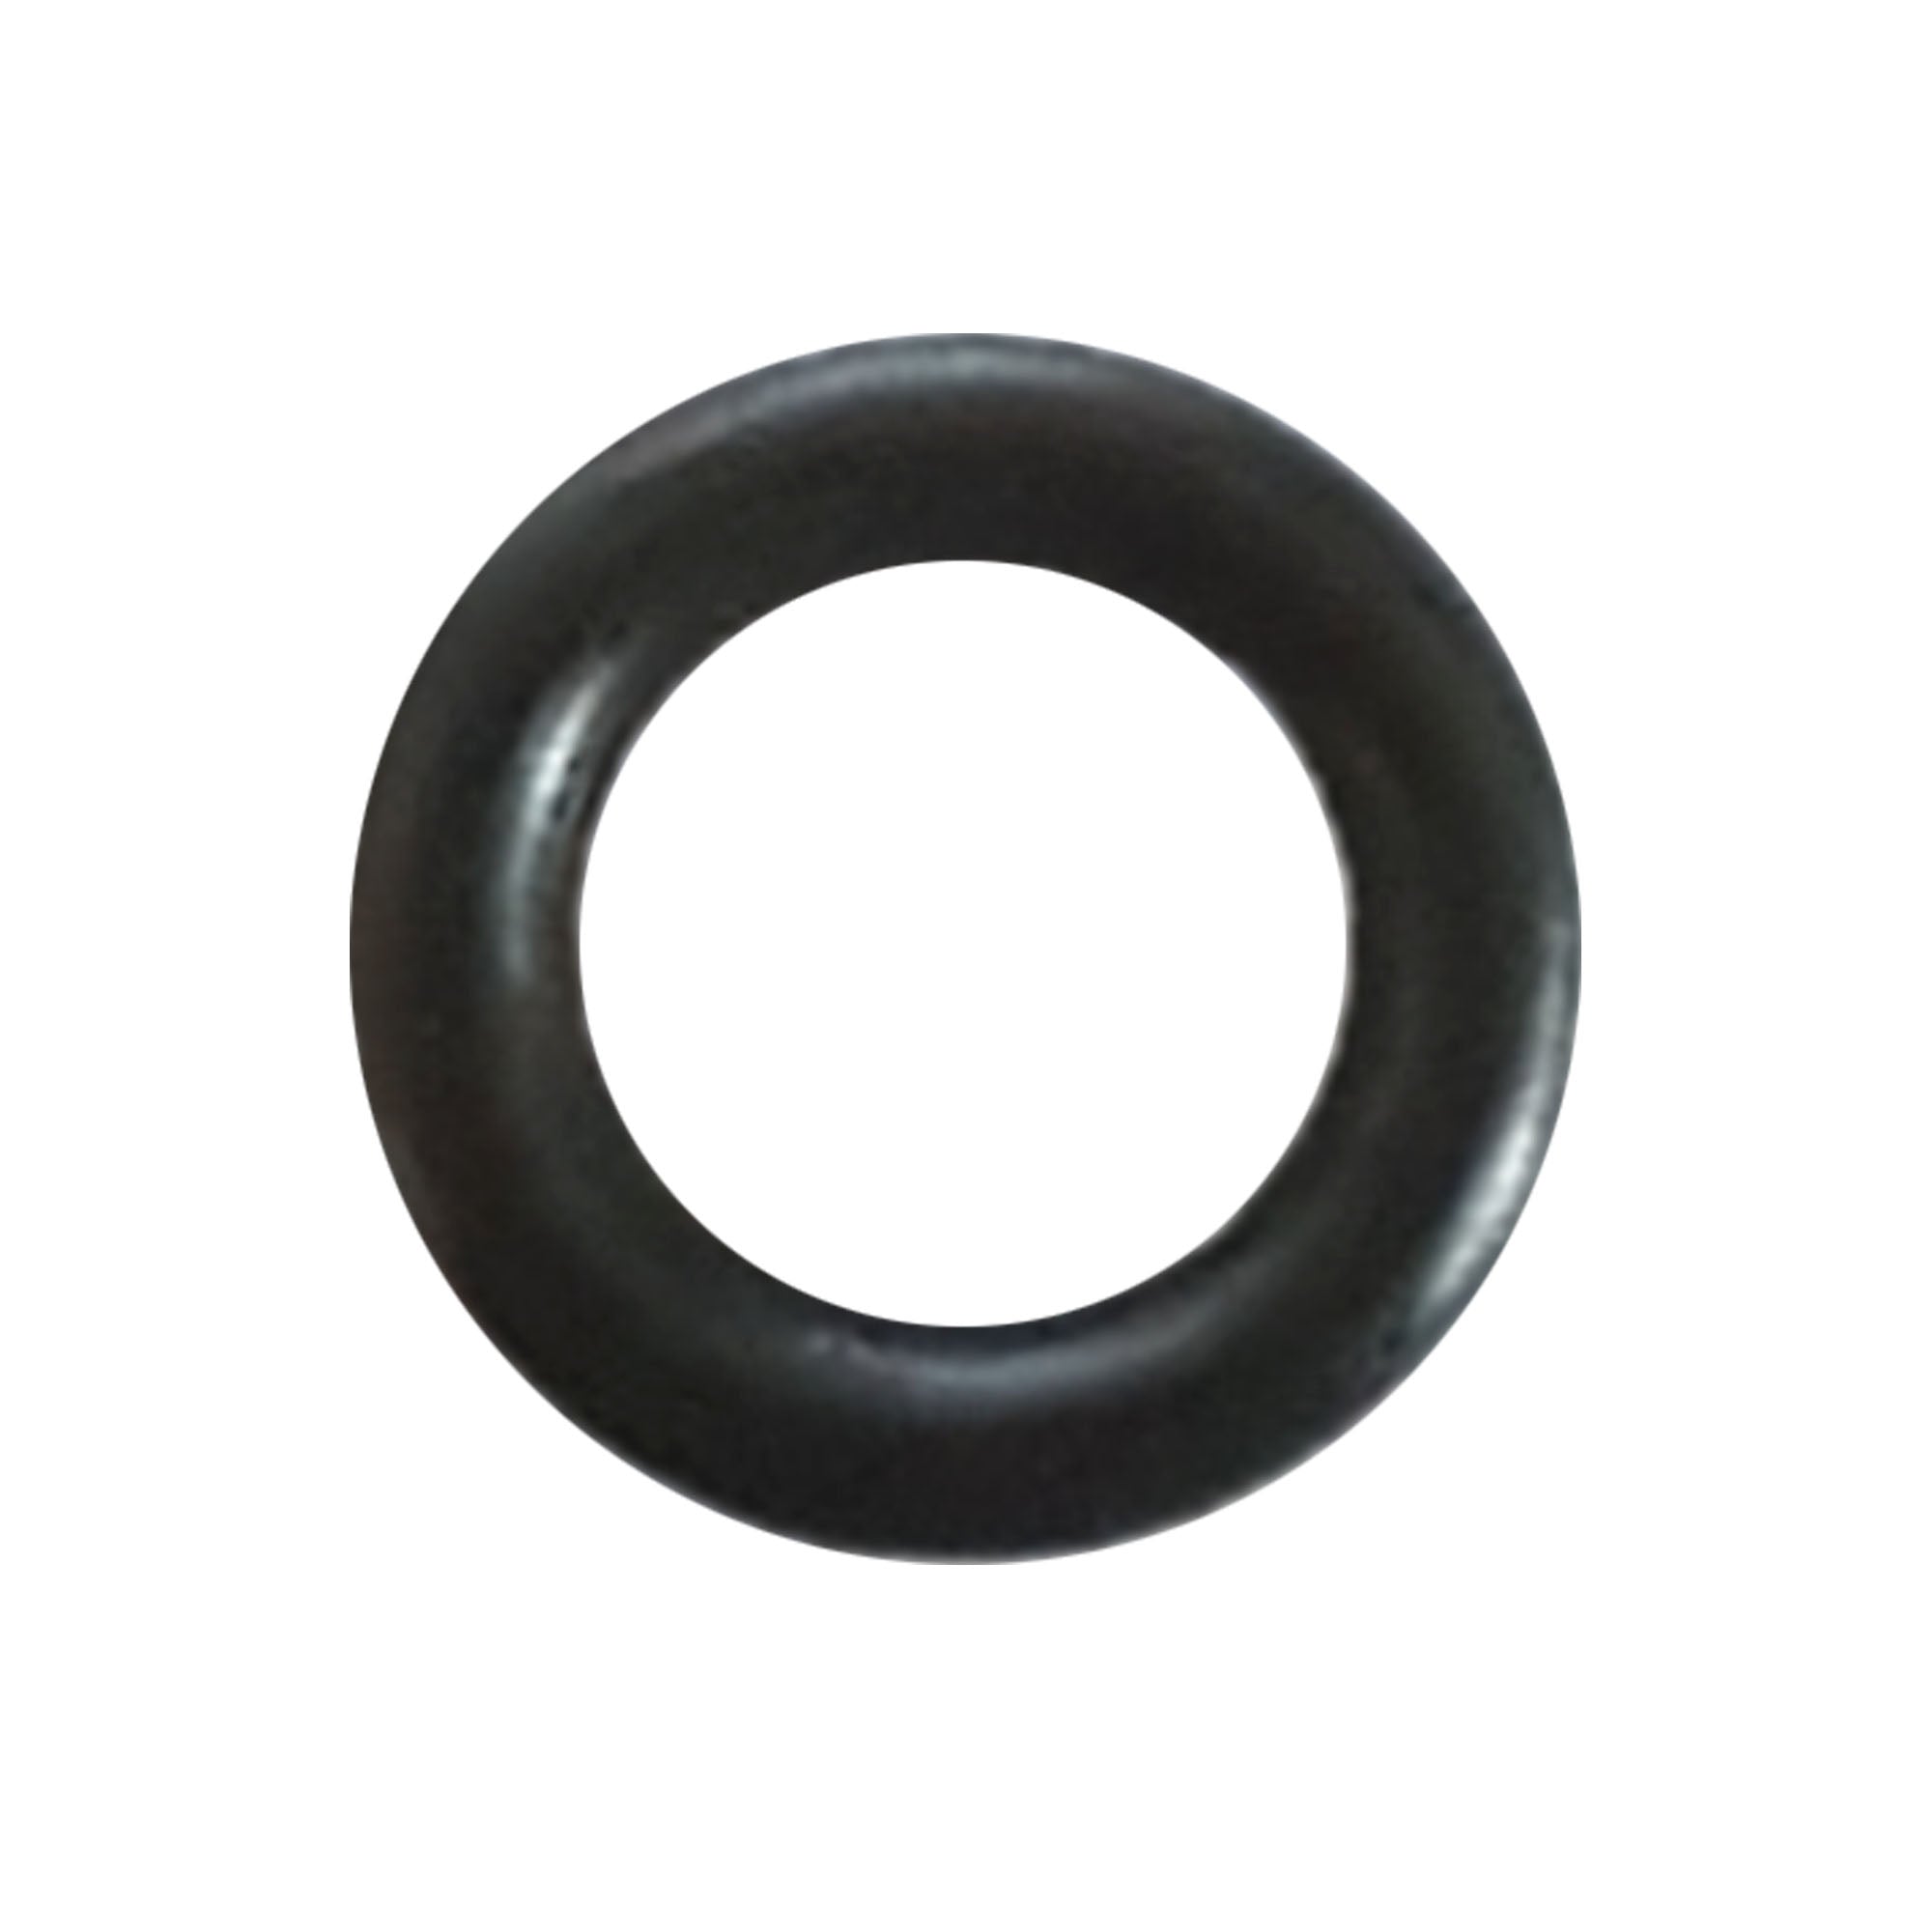 256771 - O-Ring, Pack of 6 - PURspray